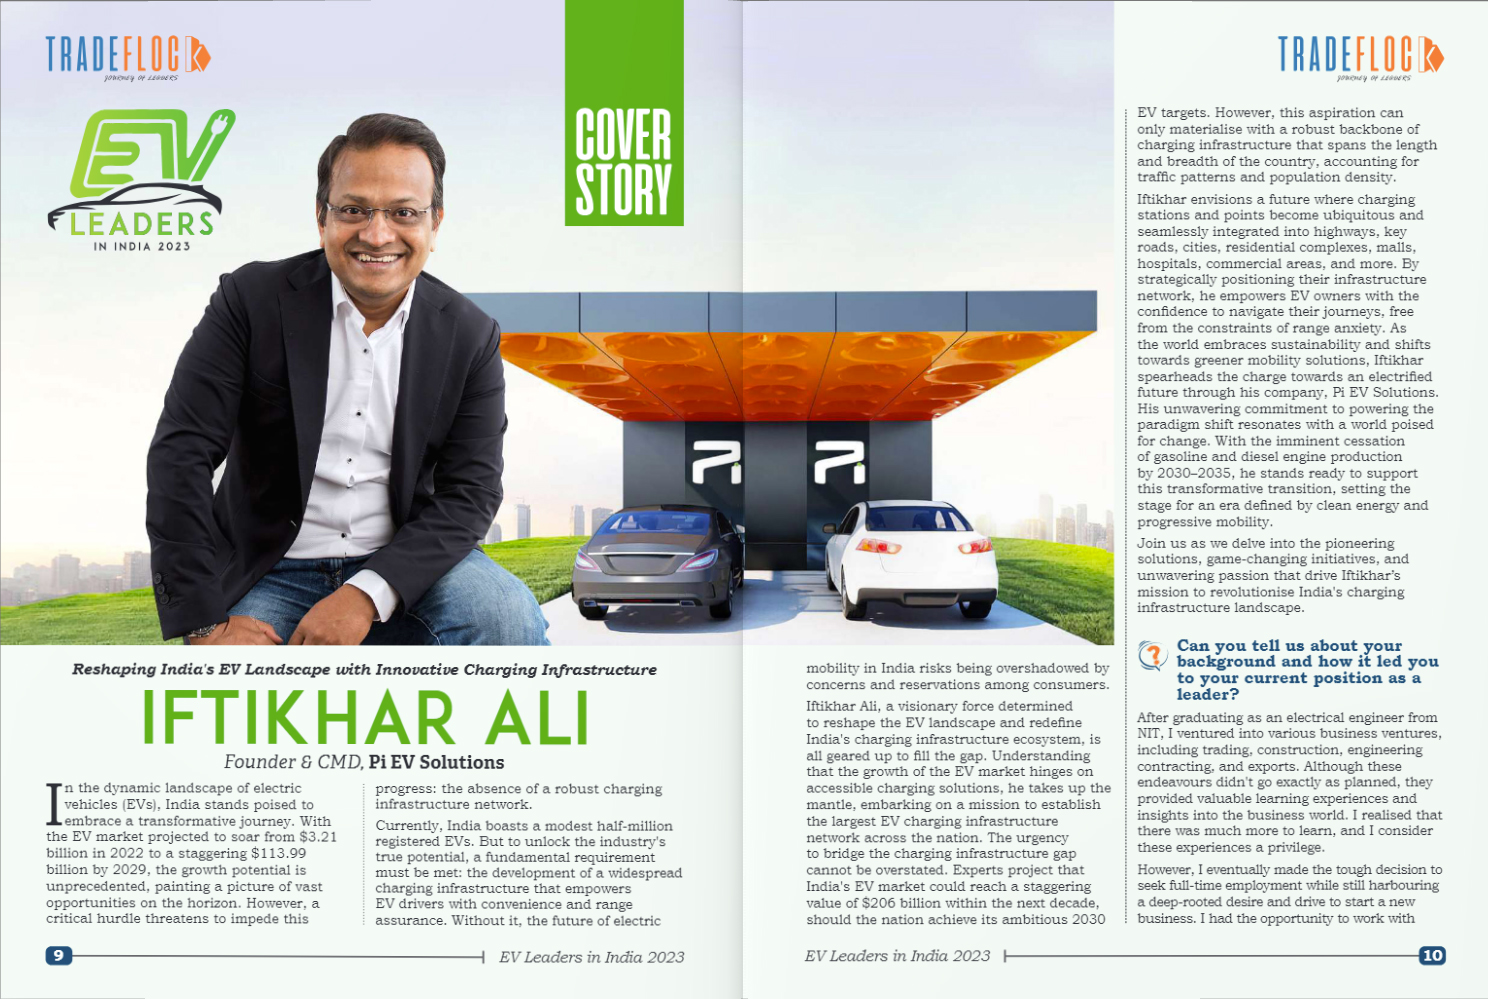 Pi EV Solutions featured in Tradeflock: EV Leaders in India 2023